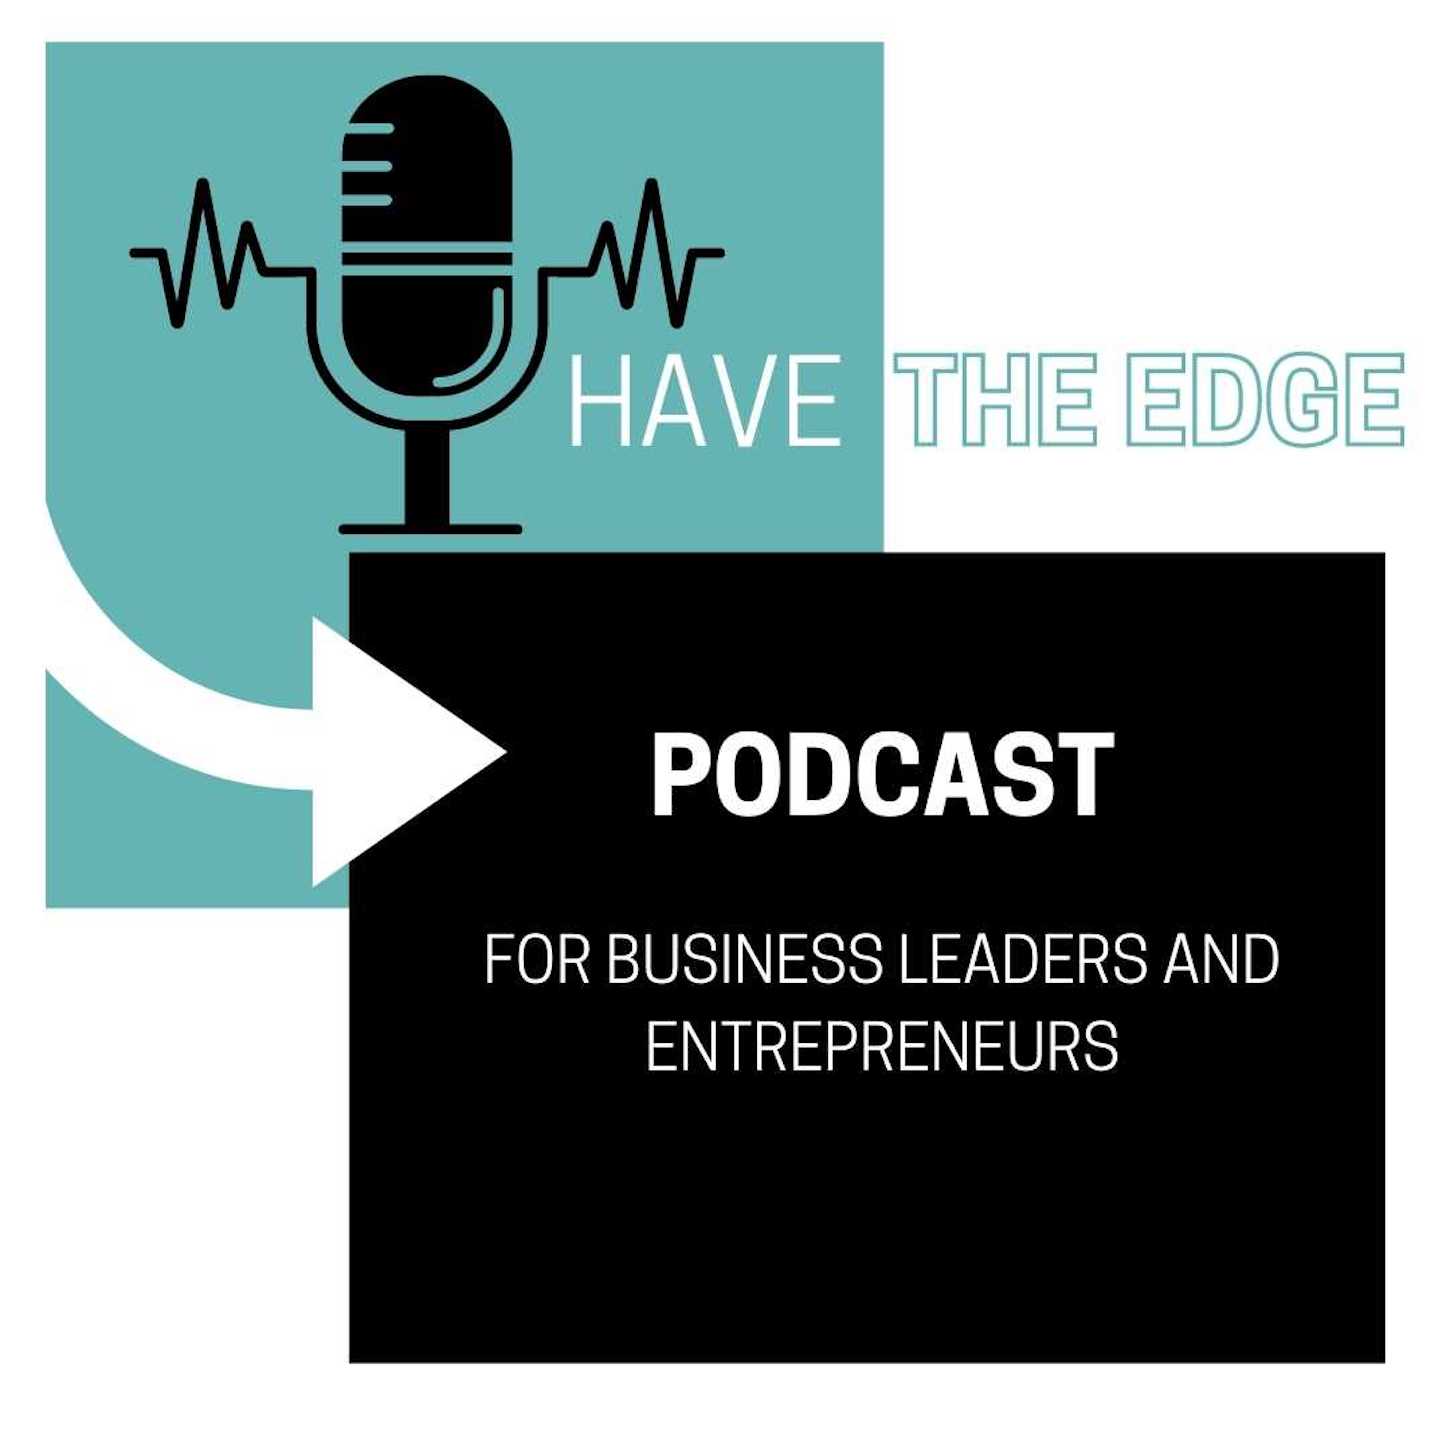 HAVE THE EDGE PODCAST